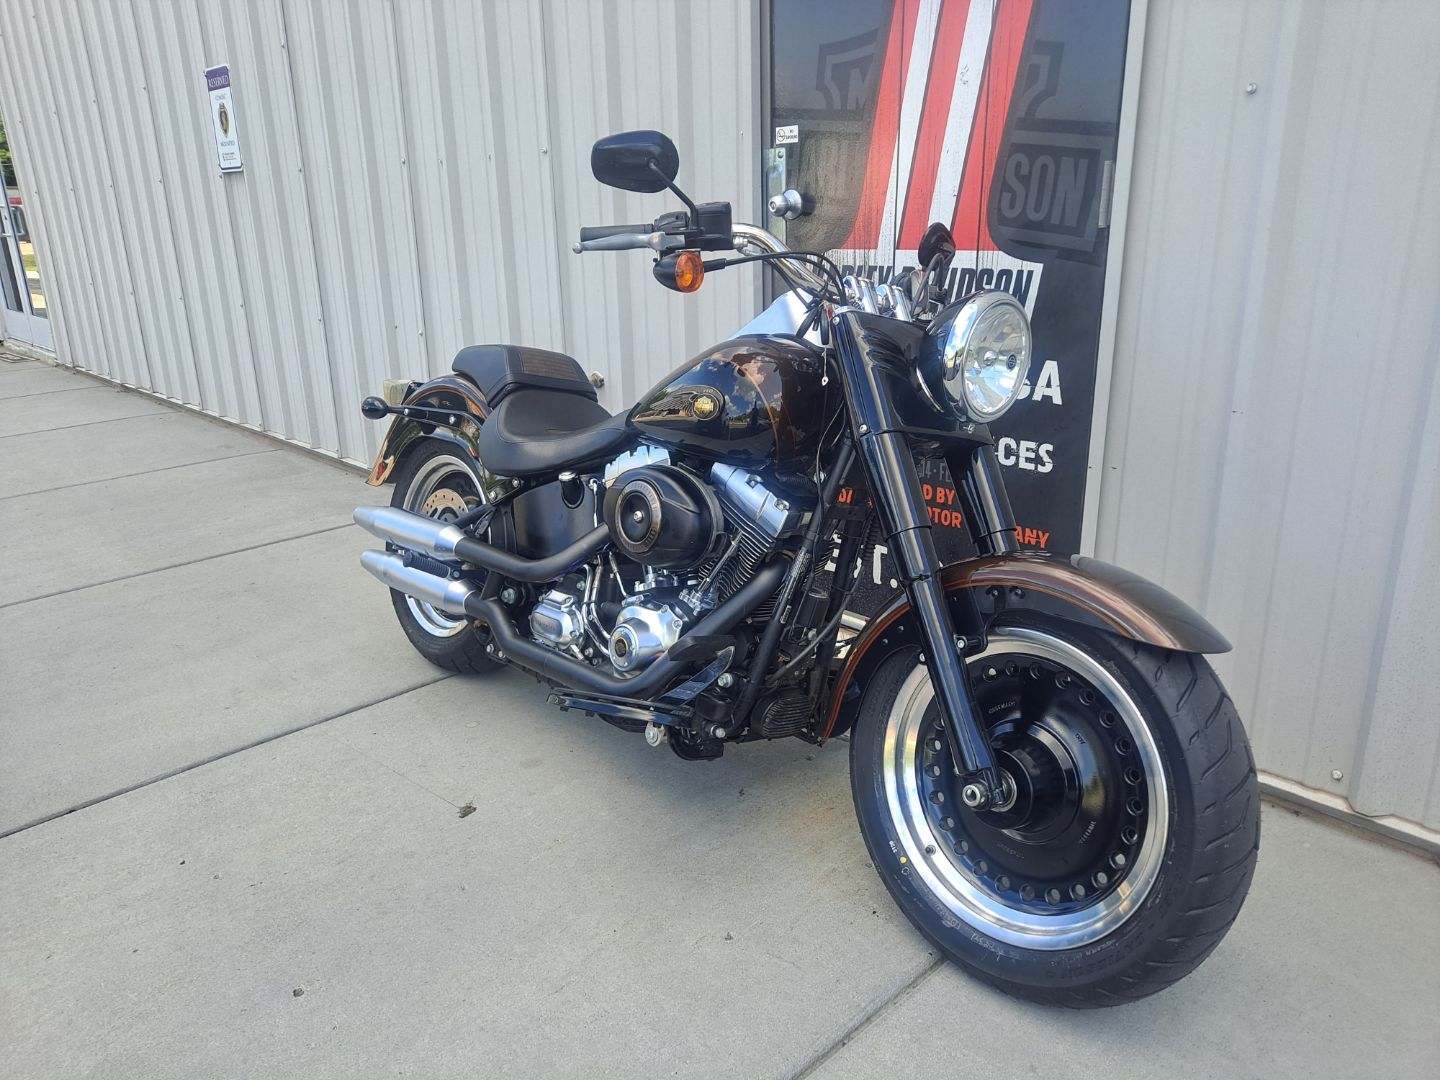 2013 Harley-Davidson Softail® Fat Boy® Lo 110th Anniversary Edition in Clarksville, Tennessee - Photo 6